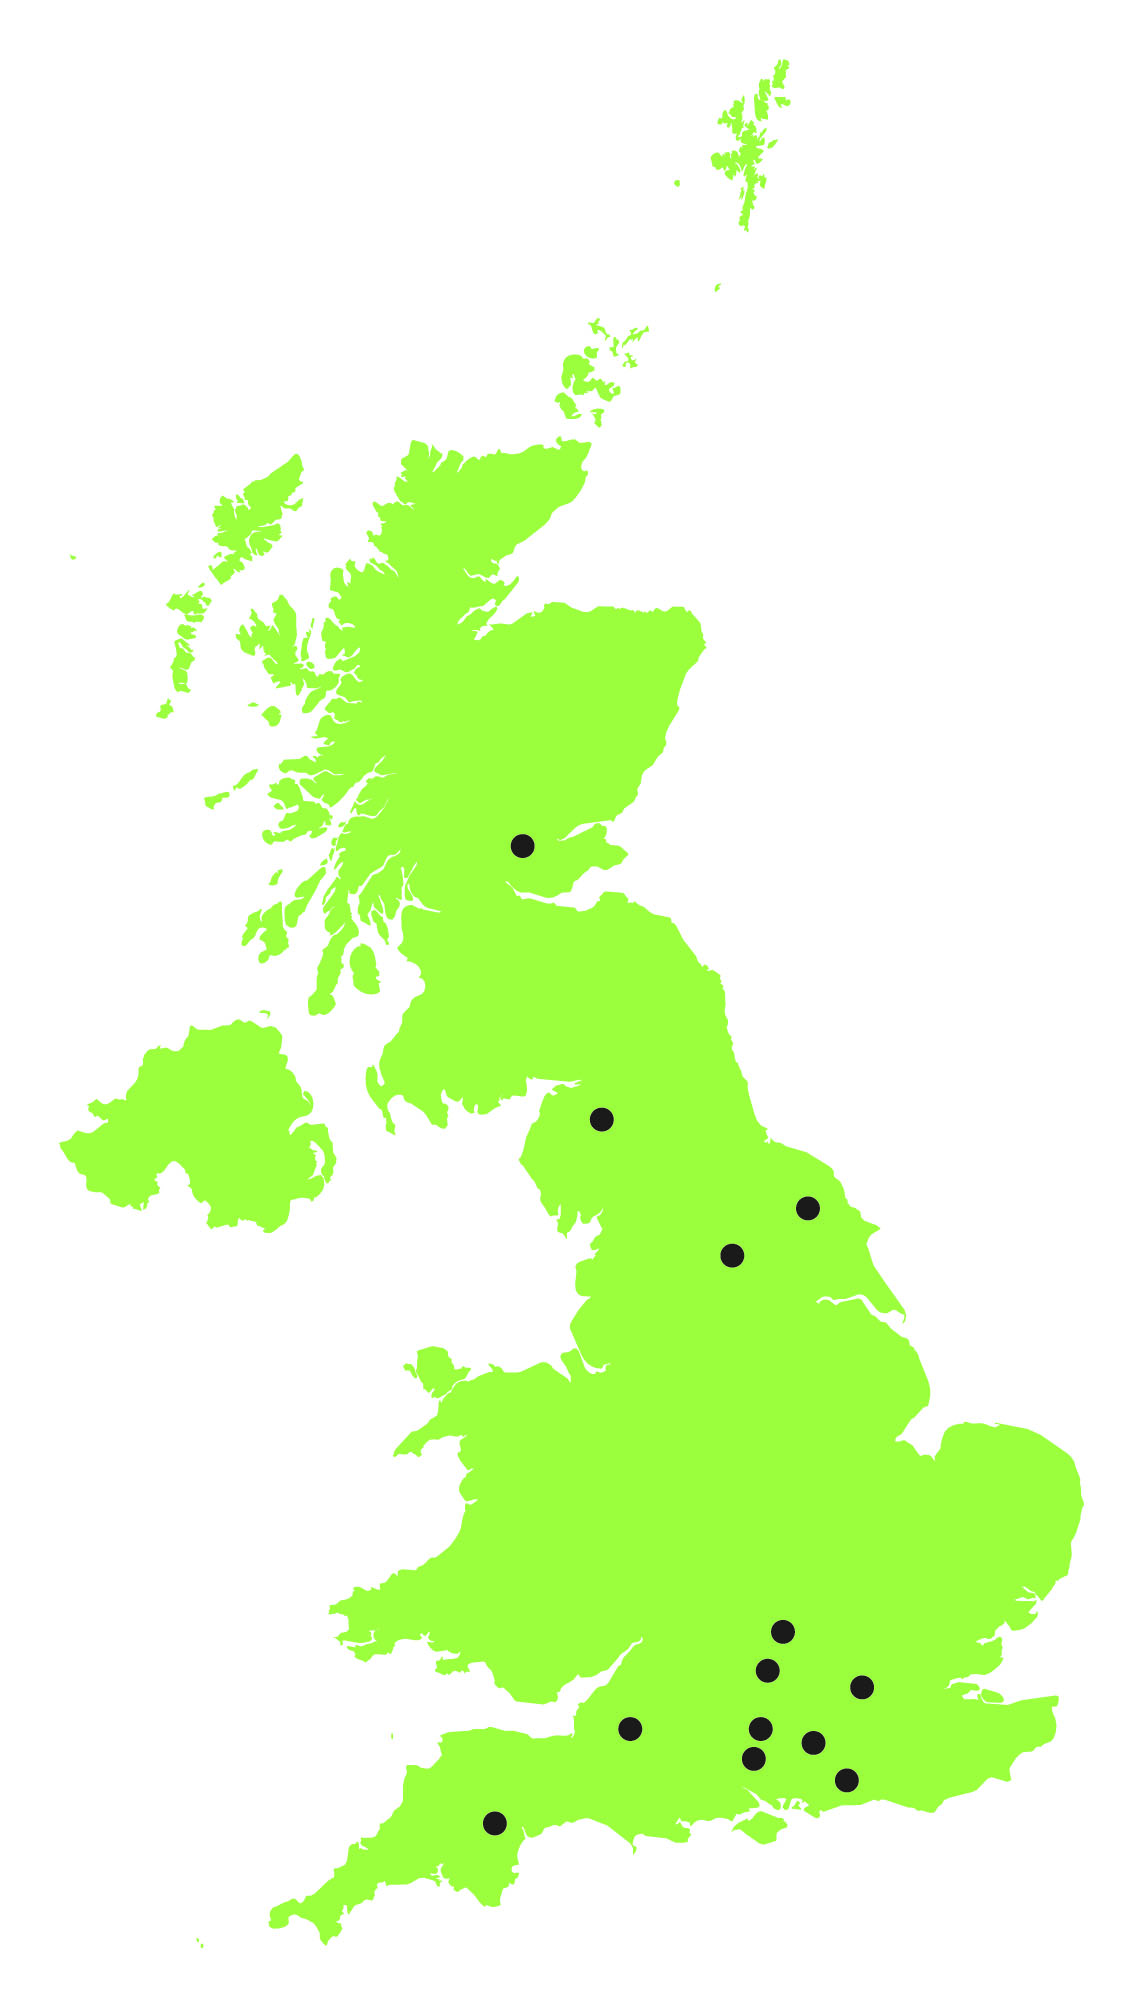 Member Locations throughout the UK